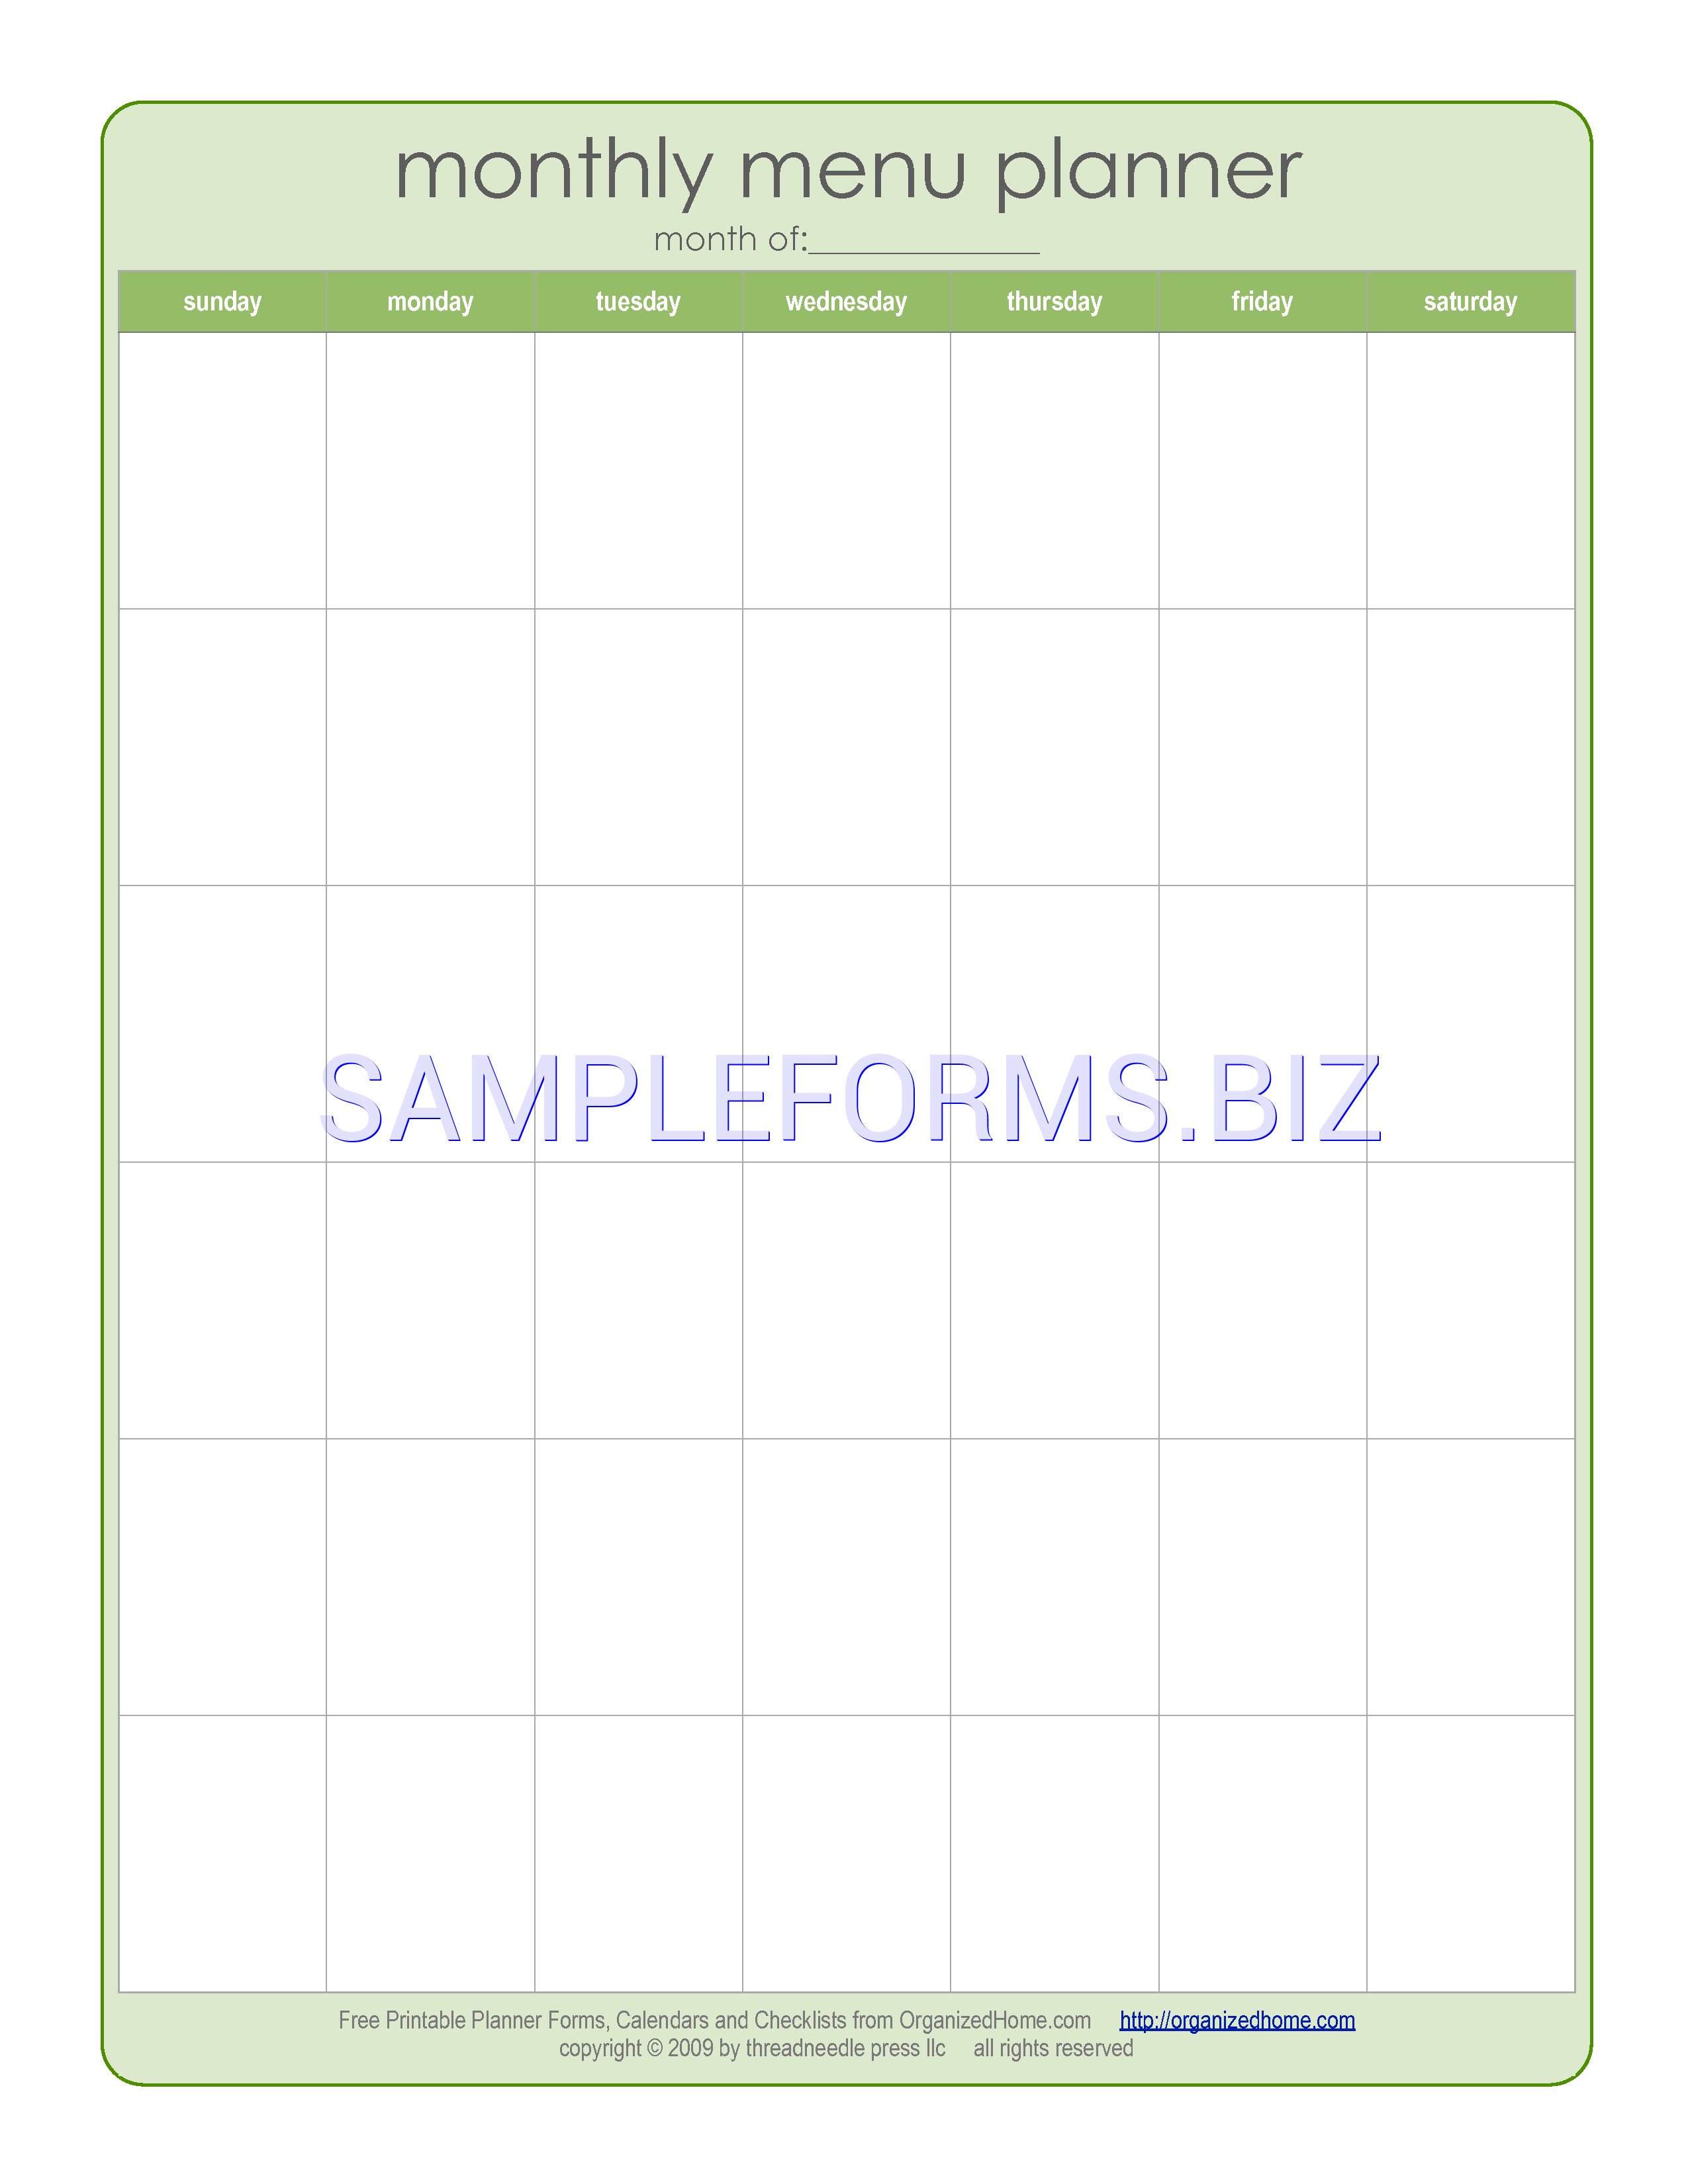 Preview free downloadable Monthly Menu Planner in PDF (page 1)